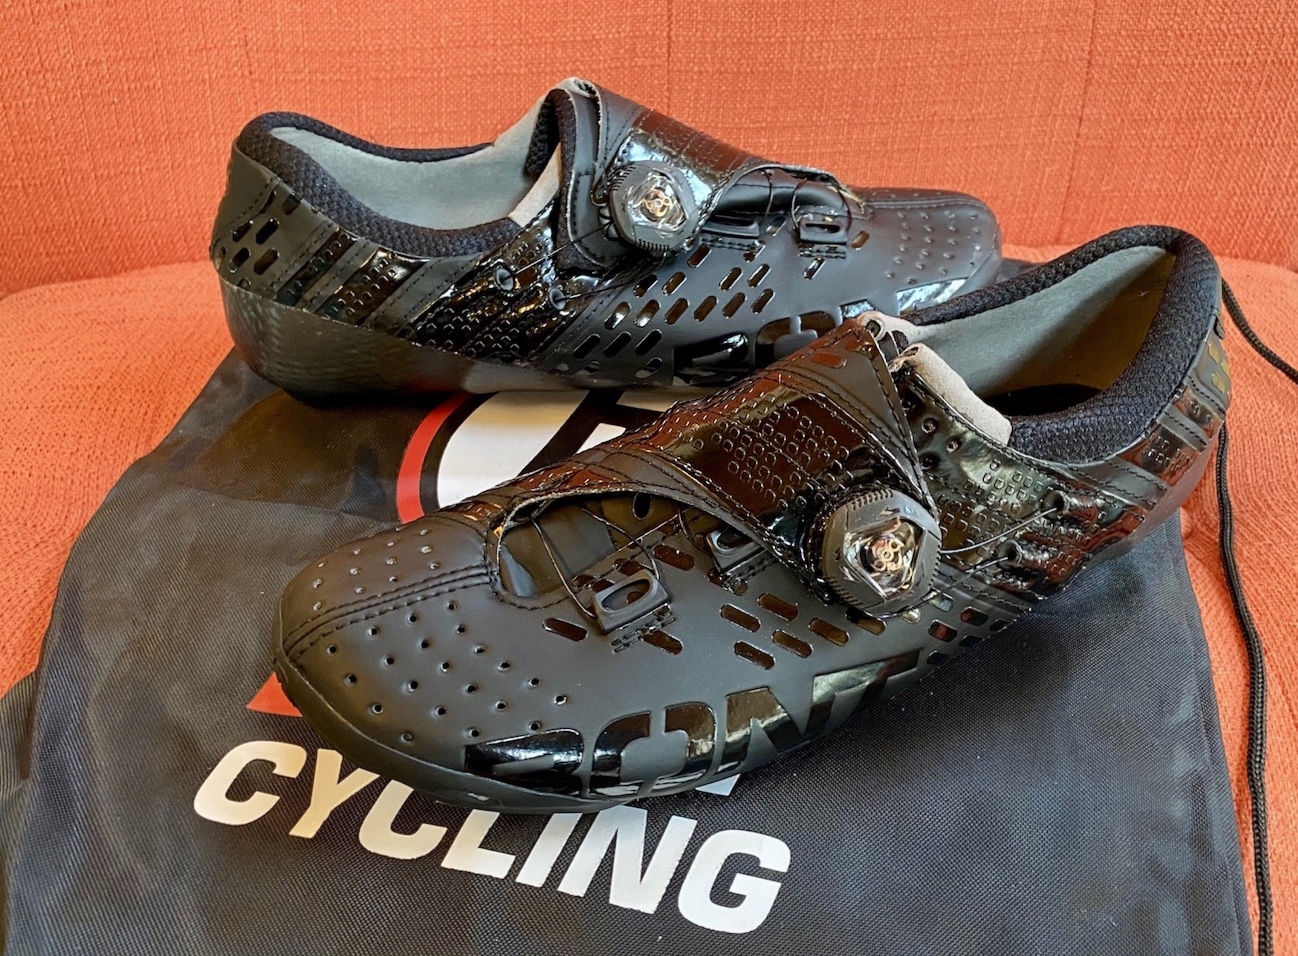 First Look at Bont's Helix Road Shoe